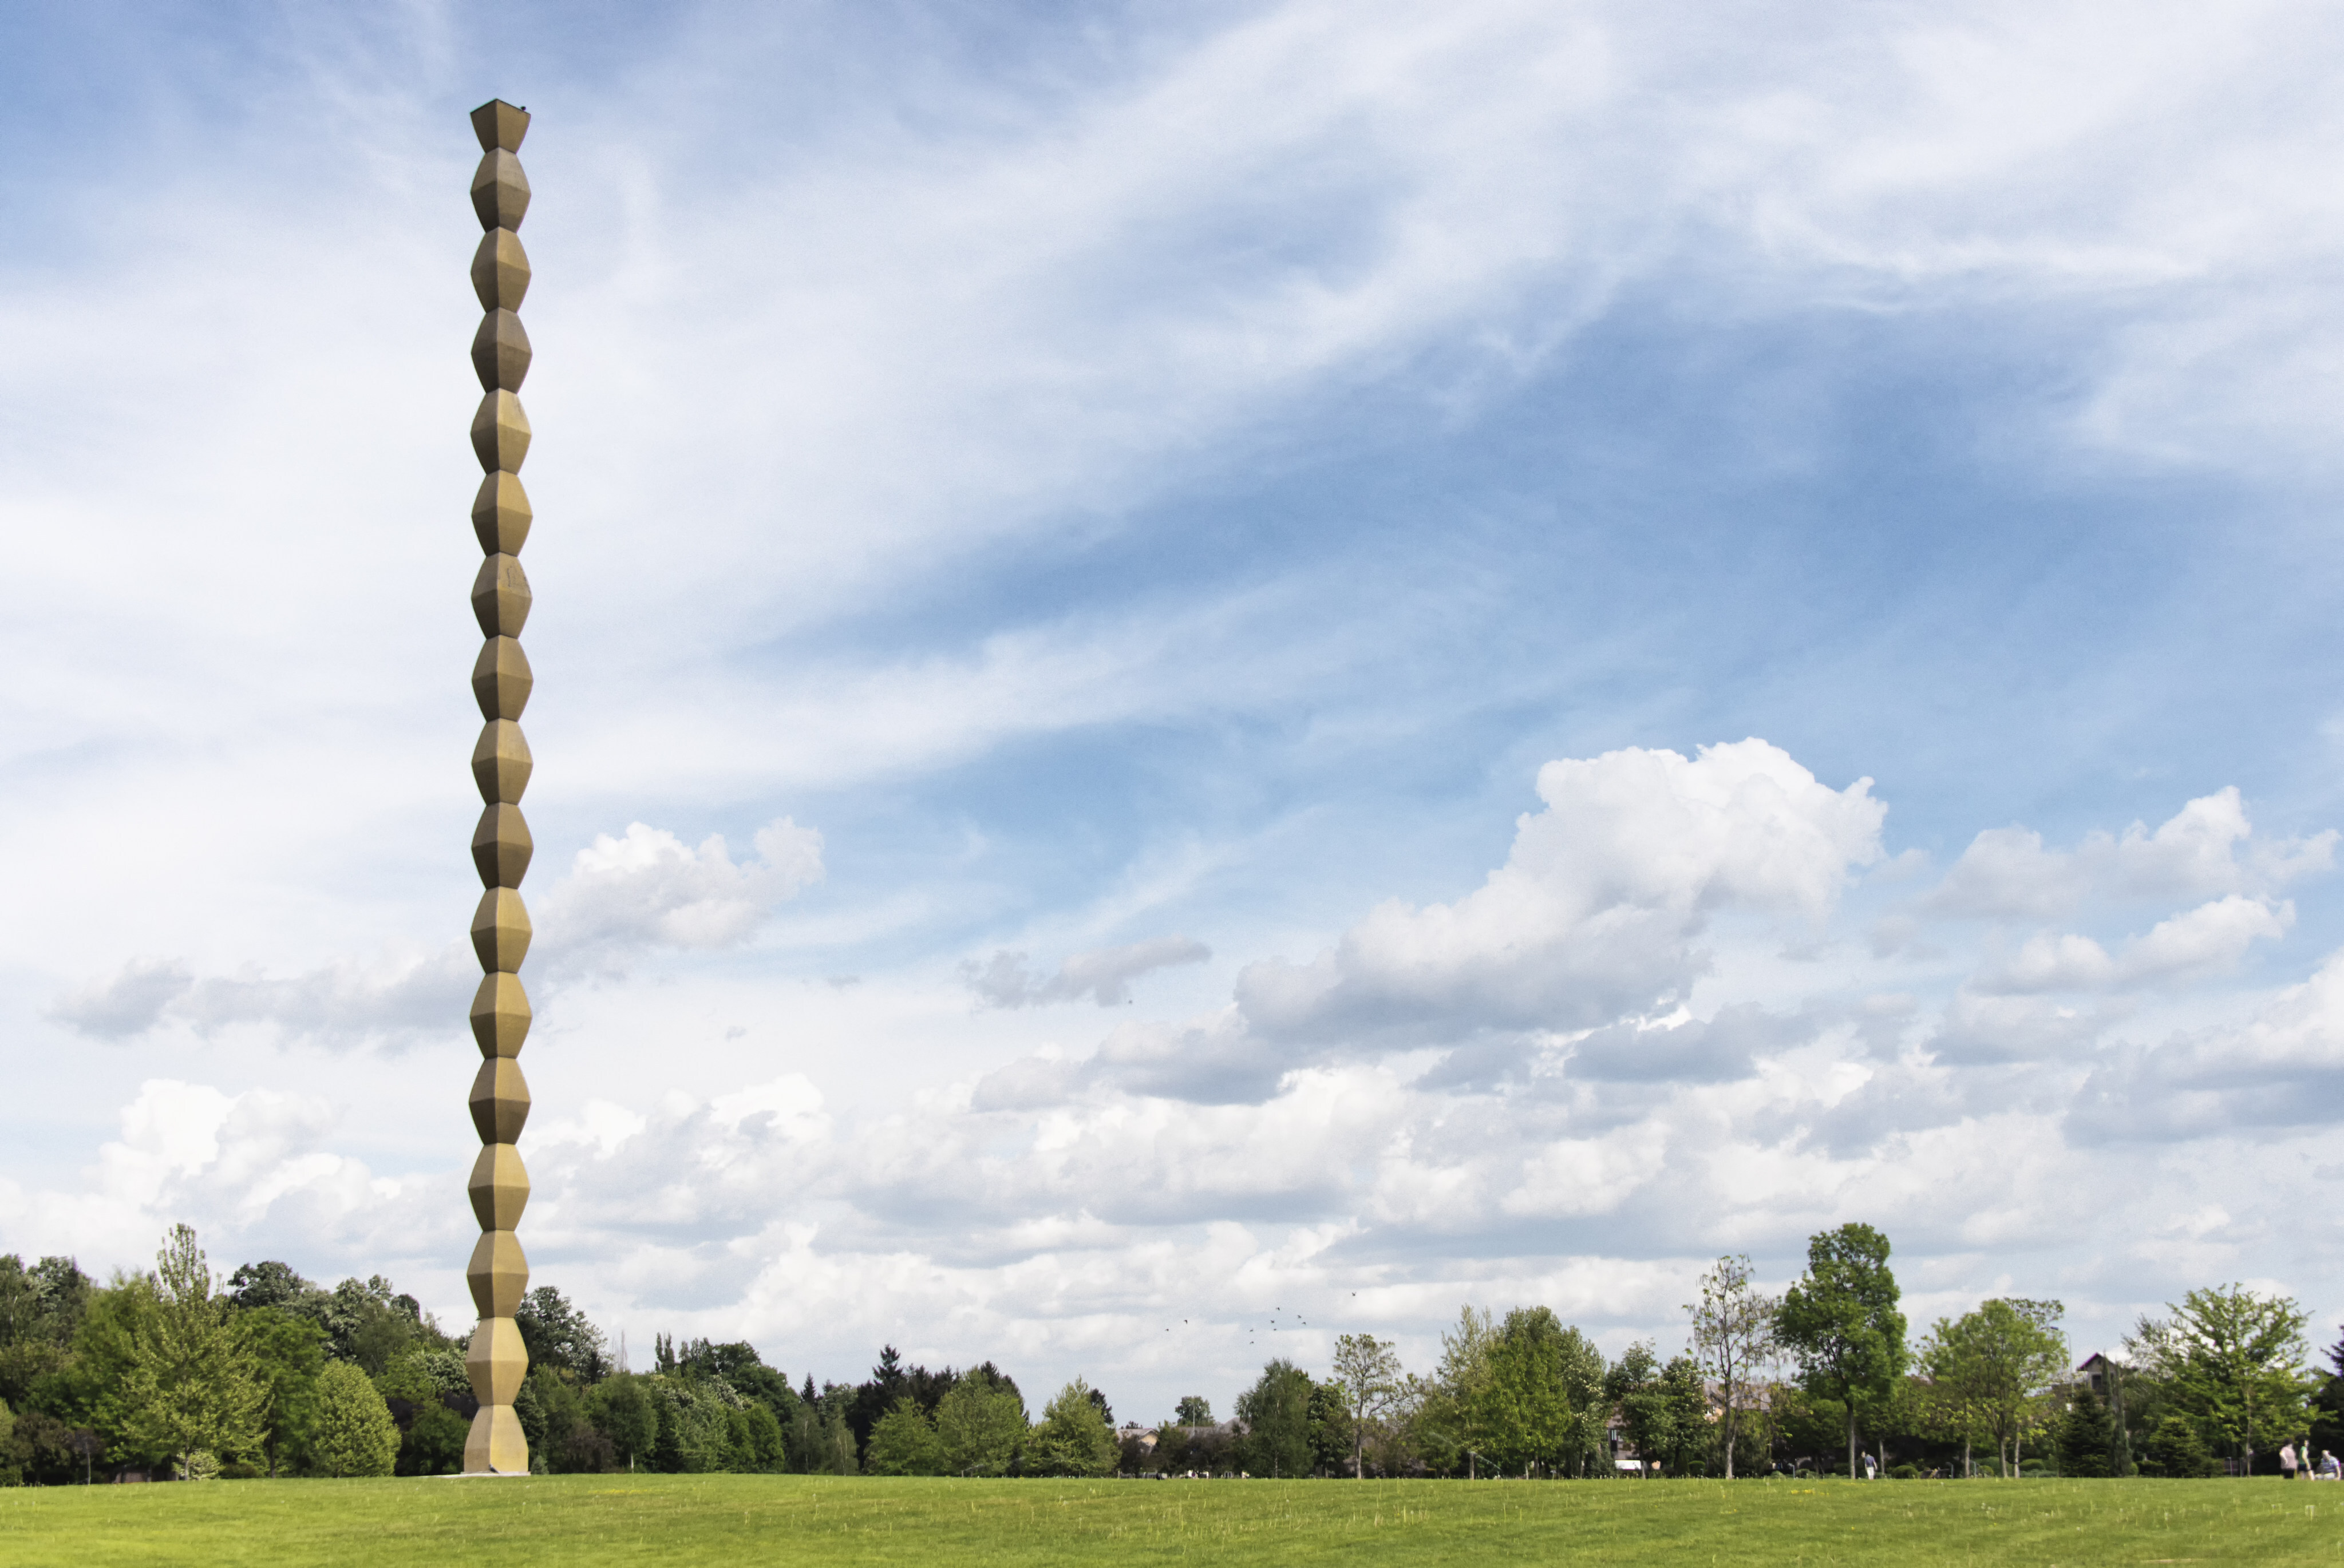 The Endless Column in Târgu Jiu, part of the Sculptural Ensemble of Constantin Brâncuși at Târgu Jiu that includes The Table of Silence and The Gate of the Kiss. Photo: Getty Images